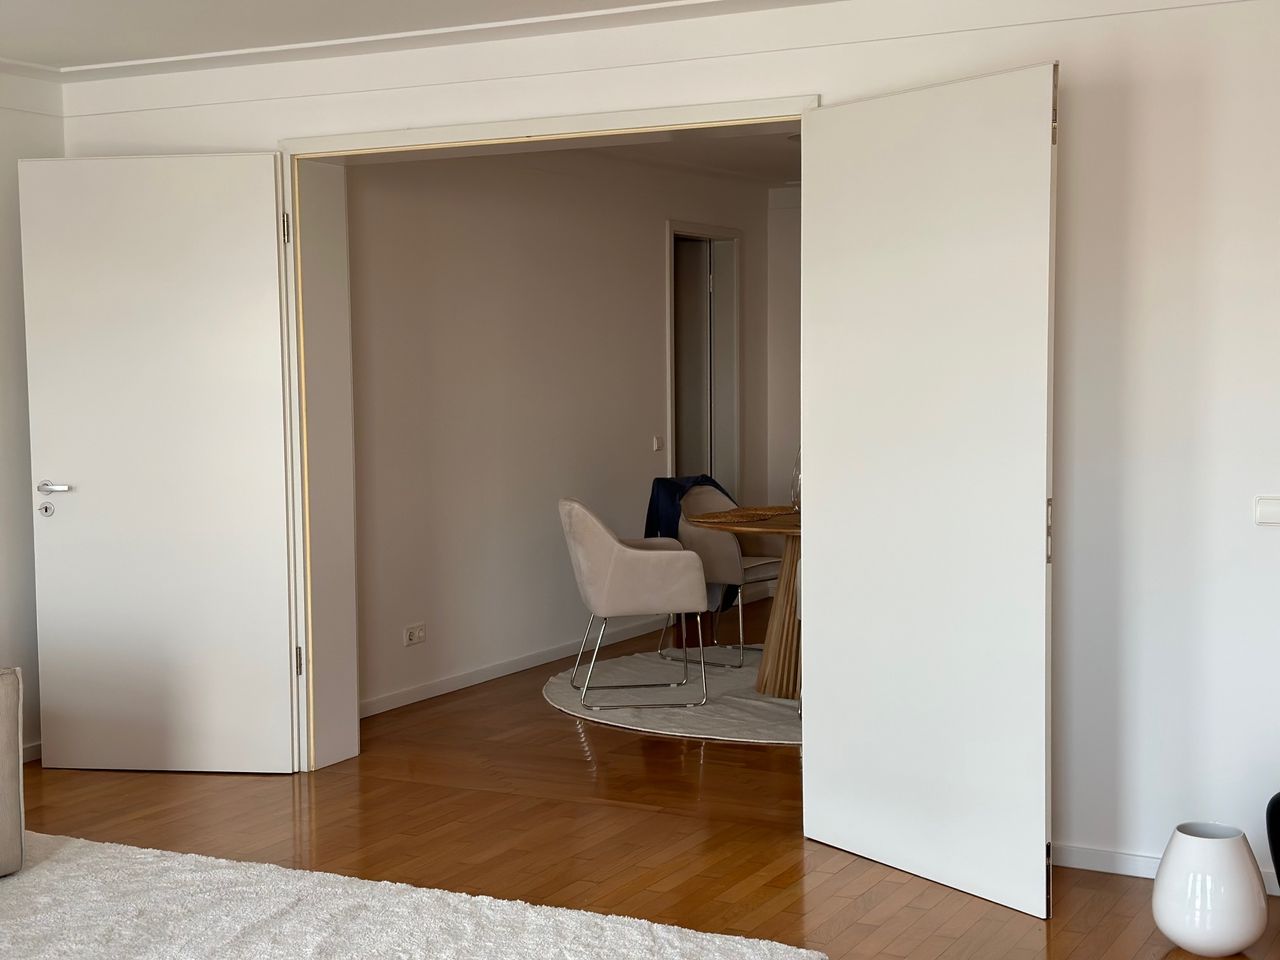 Spacious and charming flat in Mitte, Berlin